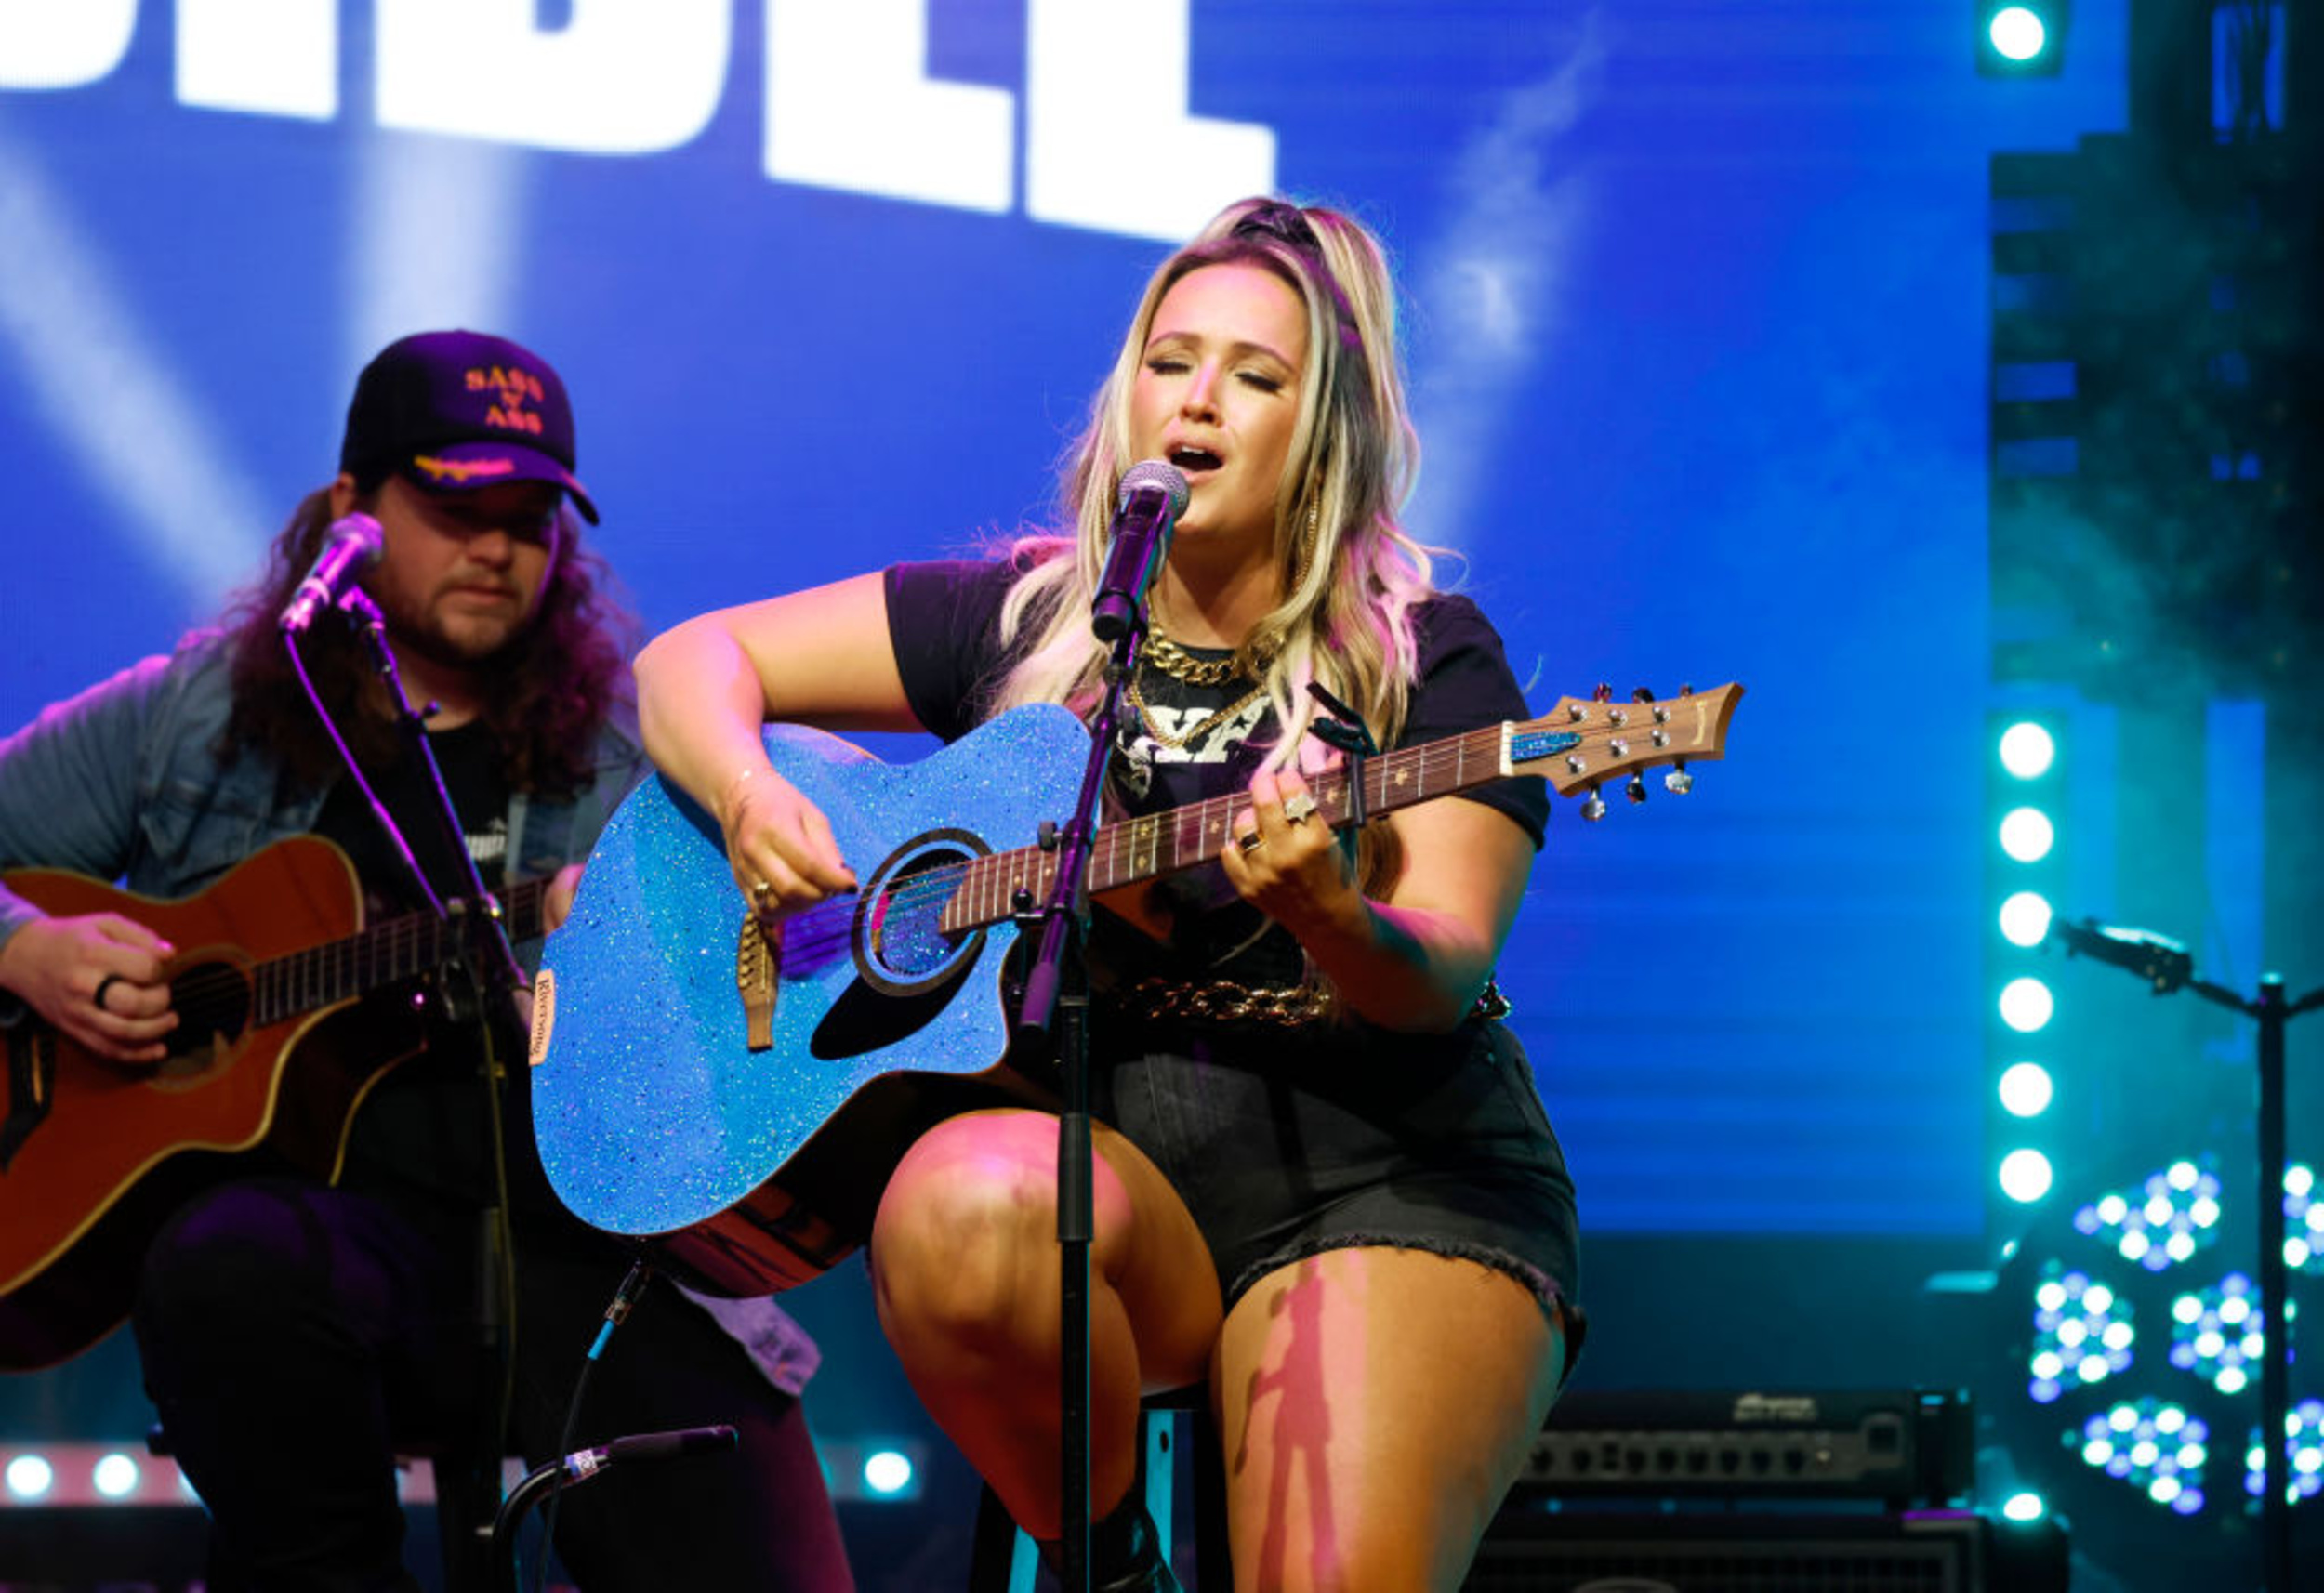 <p>She's already gone viral on TikTok and sold a ton of records, but for whatever reason, Priscilla Block isn't a household name just yet. That could all change in 2024, as she gears up for a really big year. She's headed out on a major North American tour in support of her song "Hey Jack," and fans are definitely going to fall in love with her hard-partying live show. </p><p>You may also like: <a href='https://www.yardbarker.com/entertainment/articles/the_most_underrated_rock_guitarists_of_all_time_041124/s1__39319391'>The most underrated rock guitarists of all time</a></p>